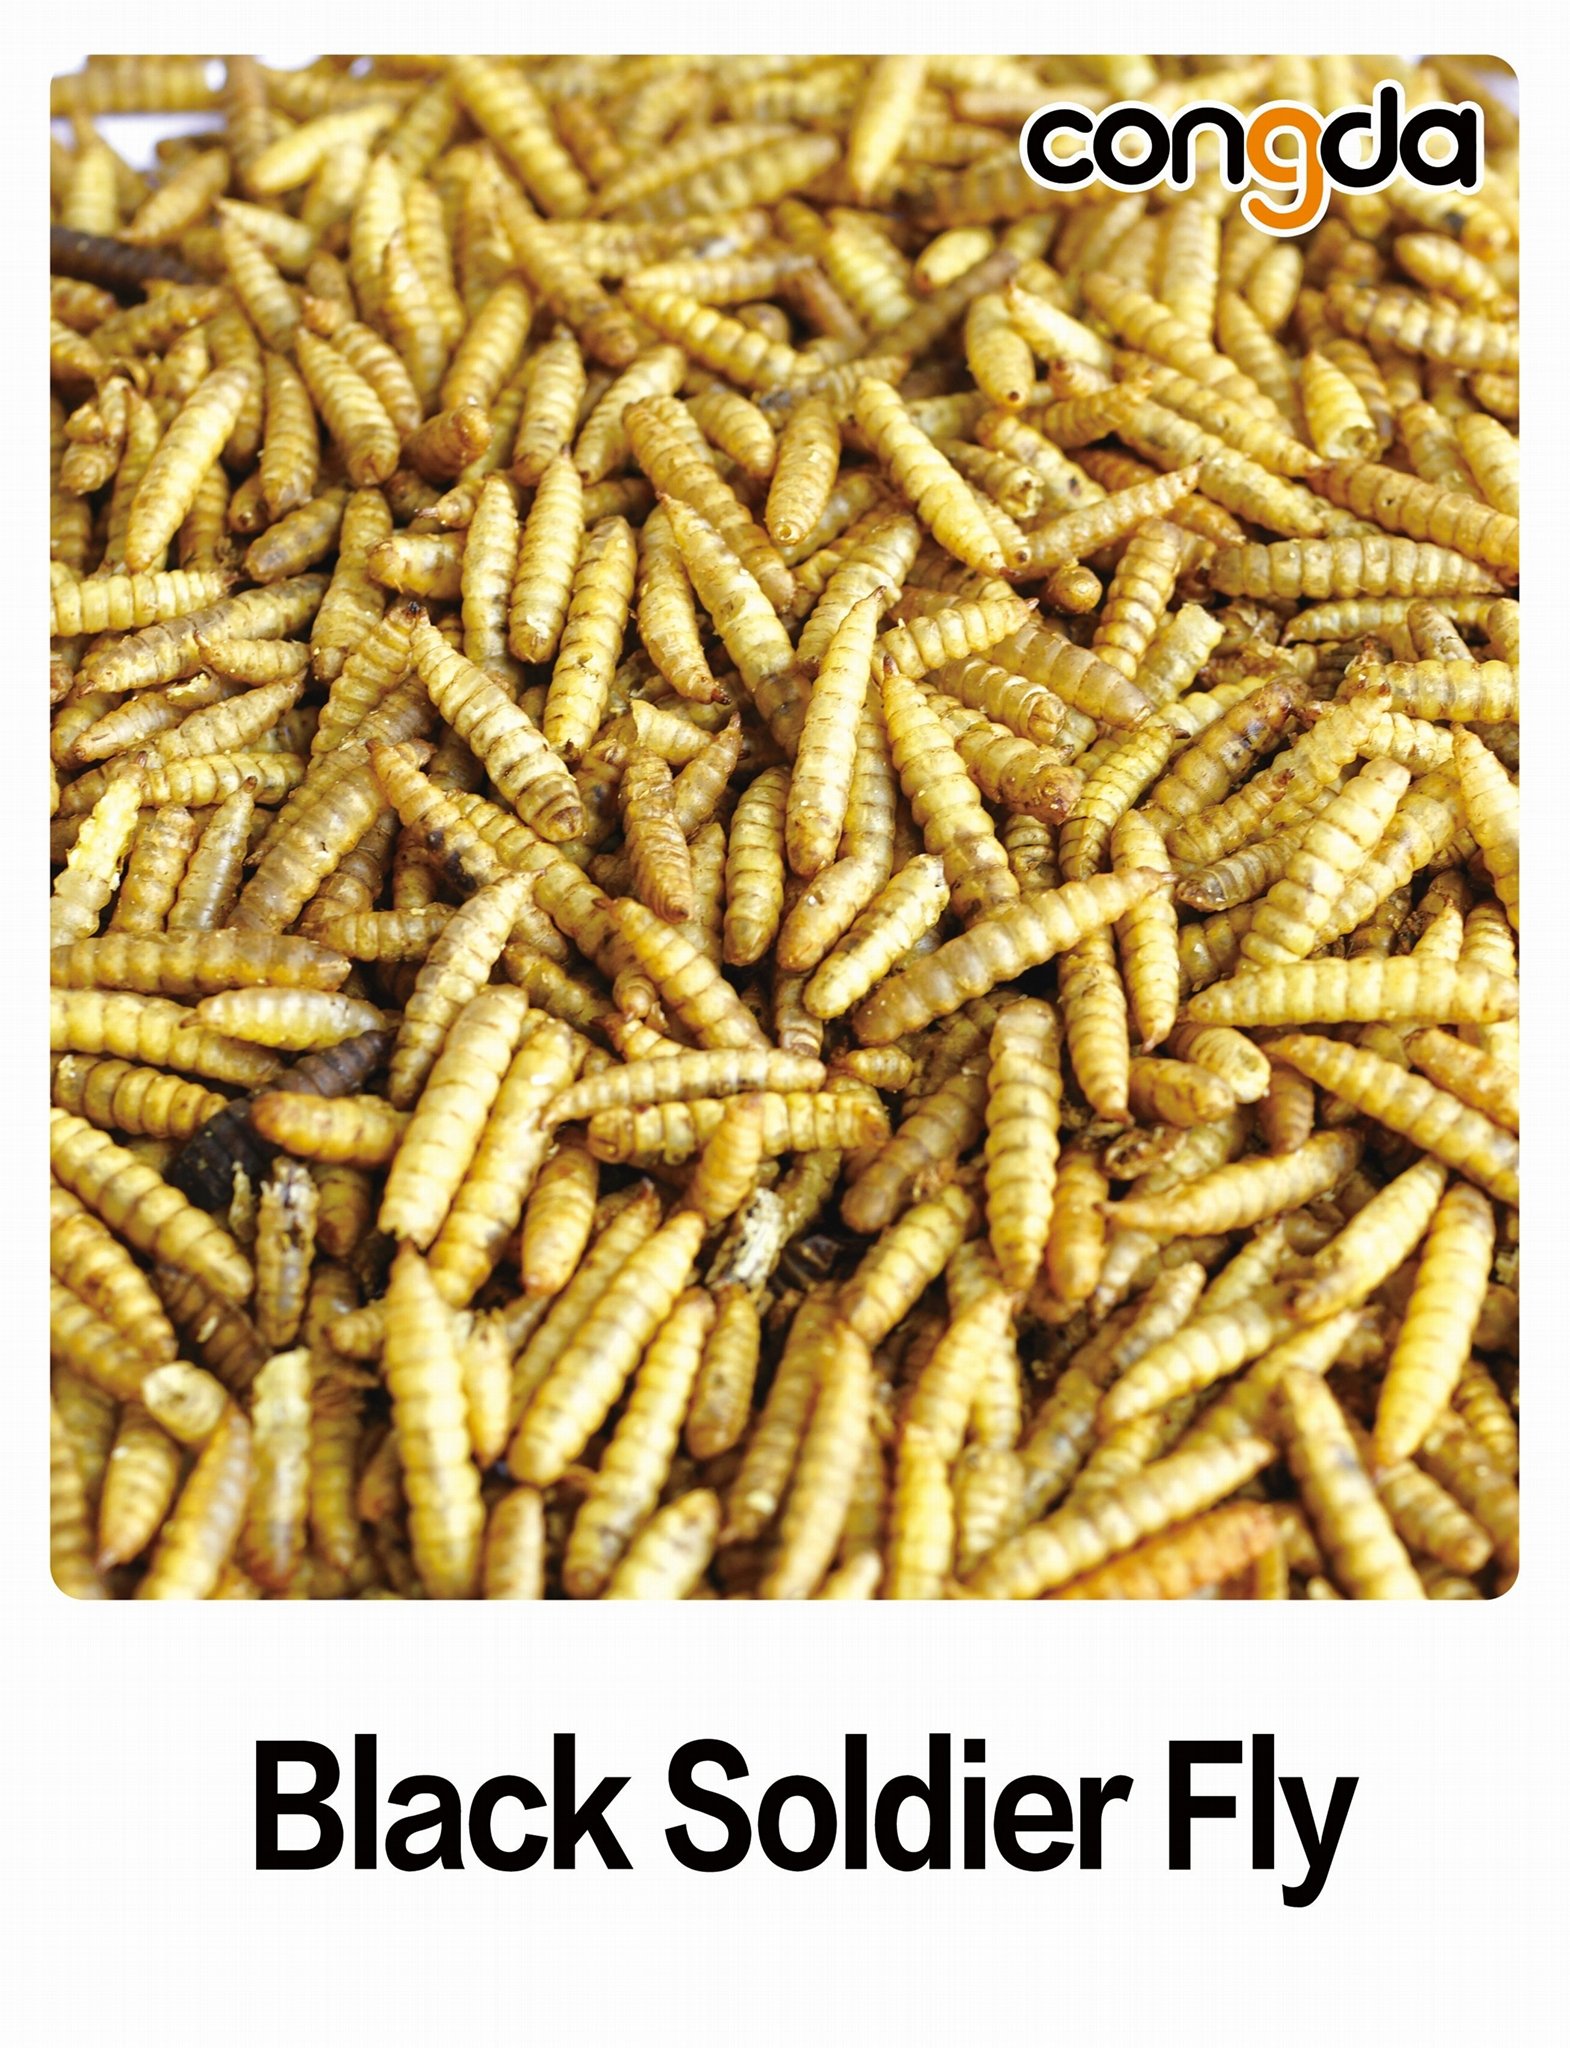 Dried Black Soldier Fly 2